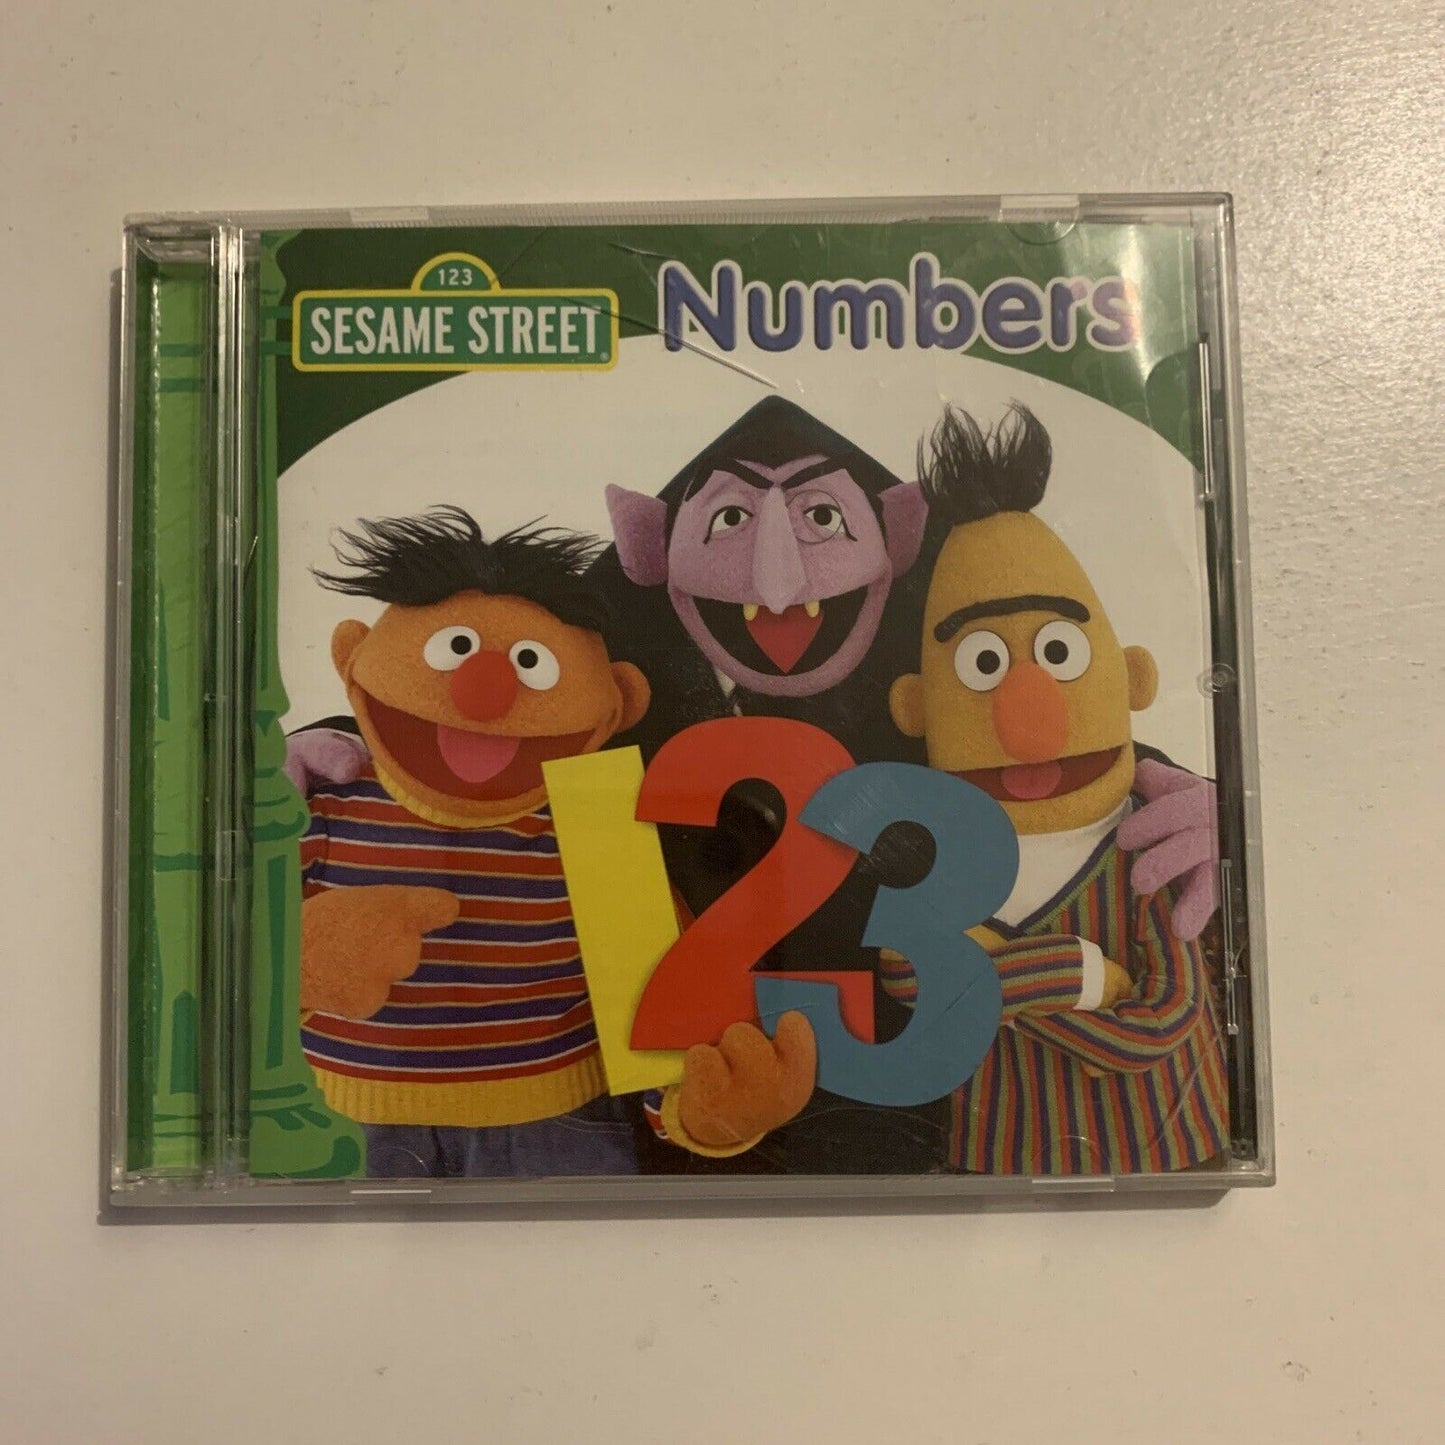 Sesame Street - Numbers (CD, 2013) ABC For Kids